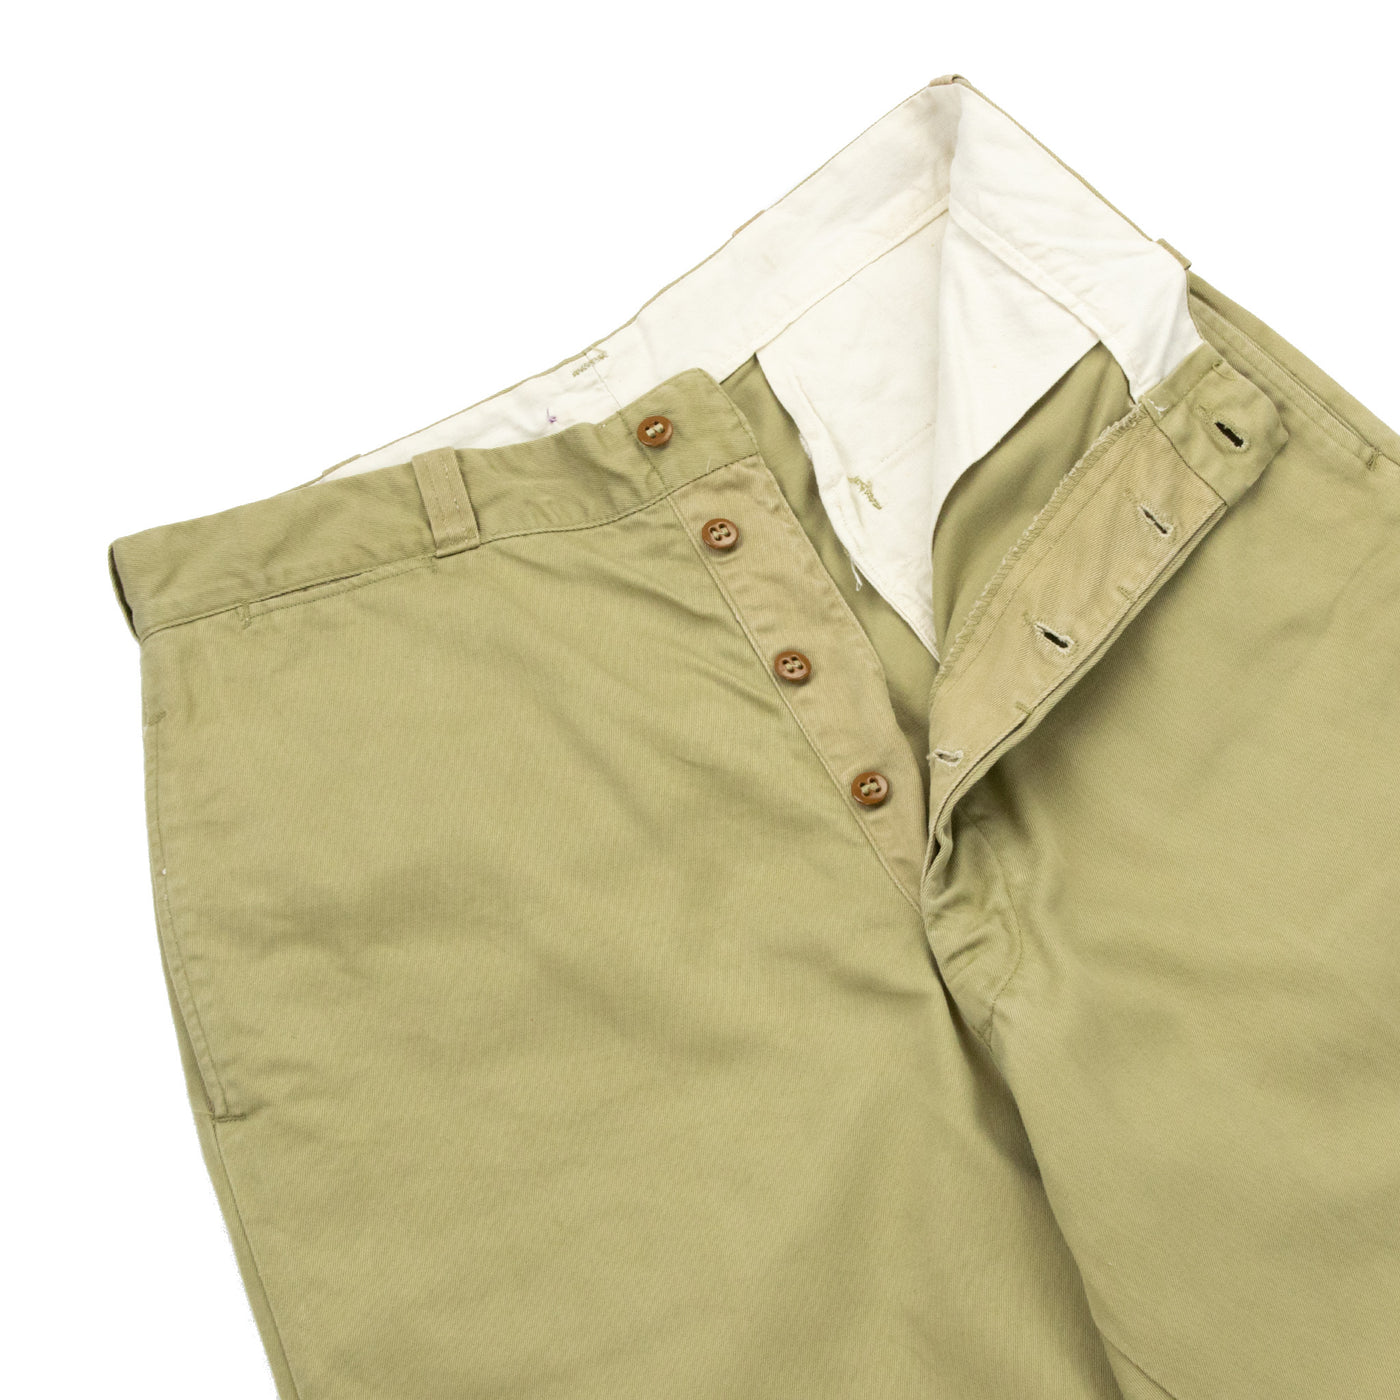 Vintage 1950s US Army Officers Military Chino Trousers Khaki - 28